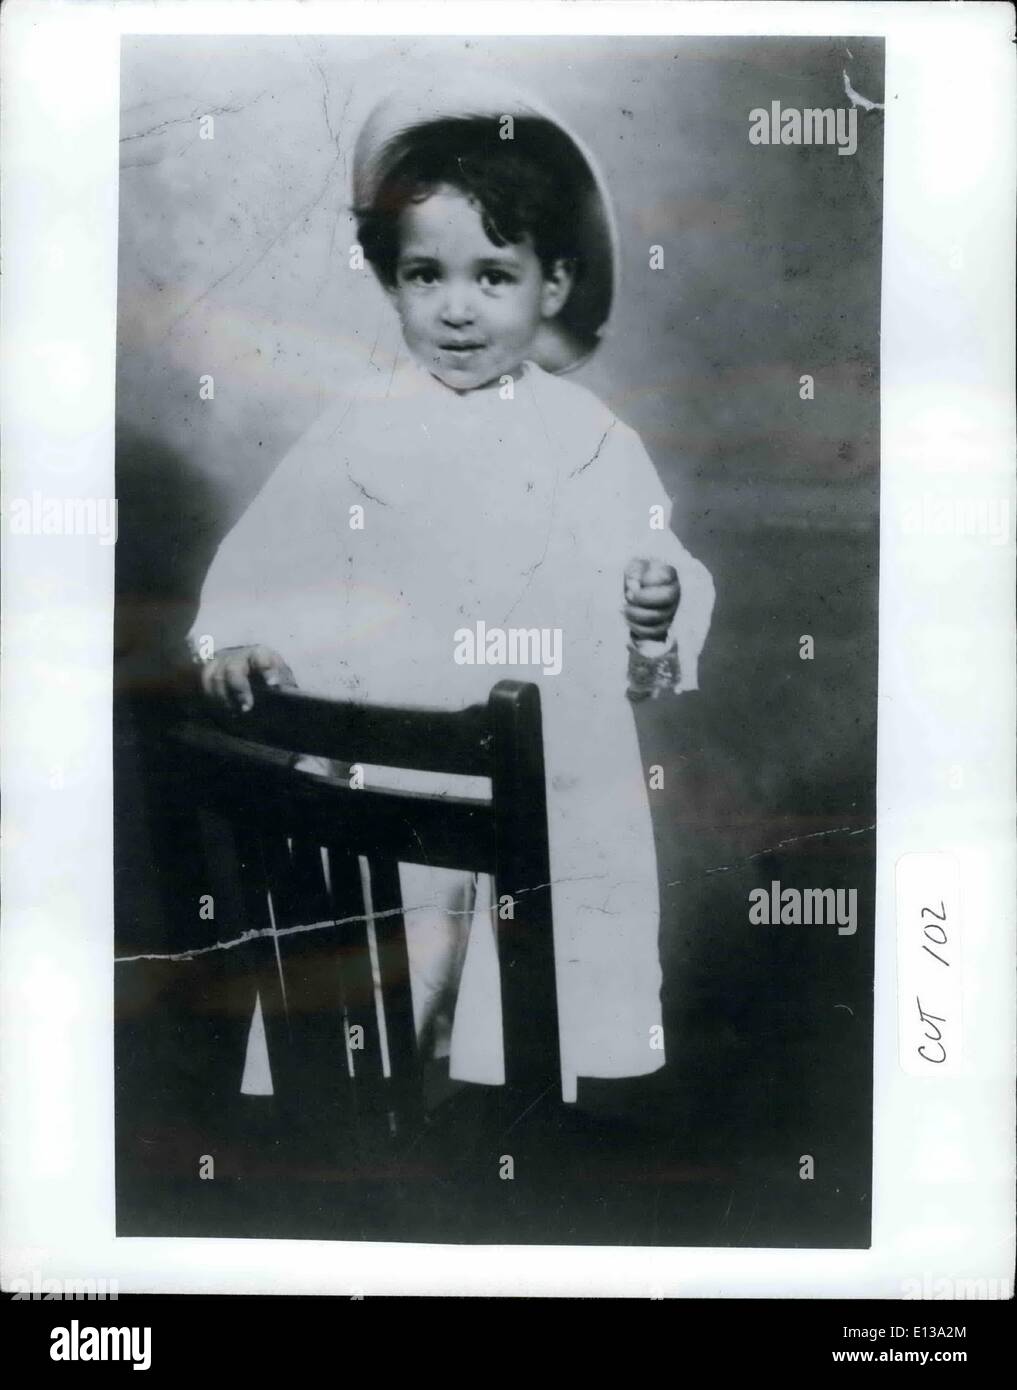 Feb. 29, 2012 - Fifty seven years ago a two year old American ethnic boy shown in Photo stared apprehensively into the big eye Stock Photo